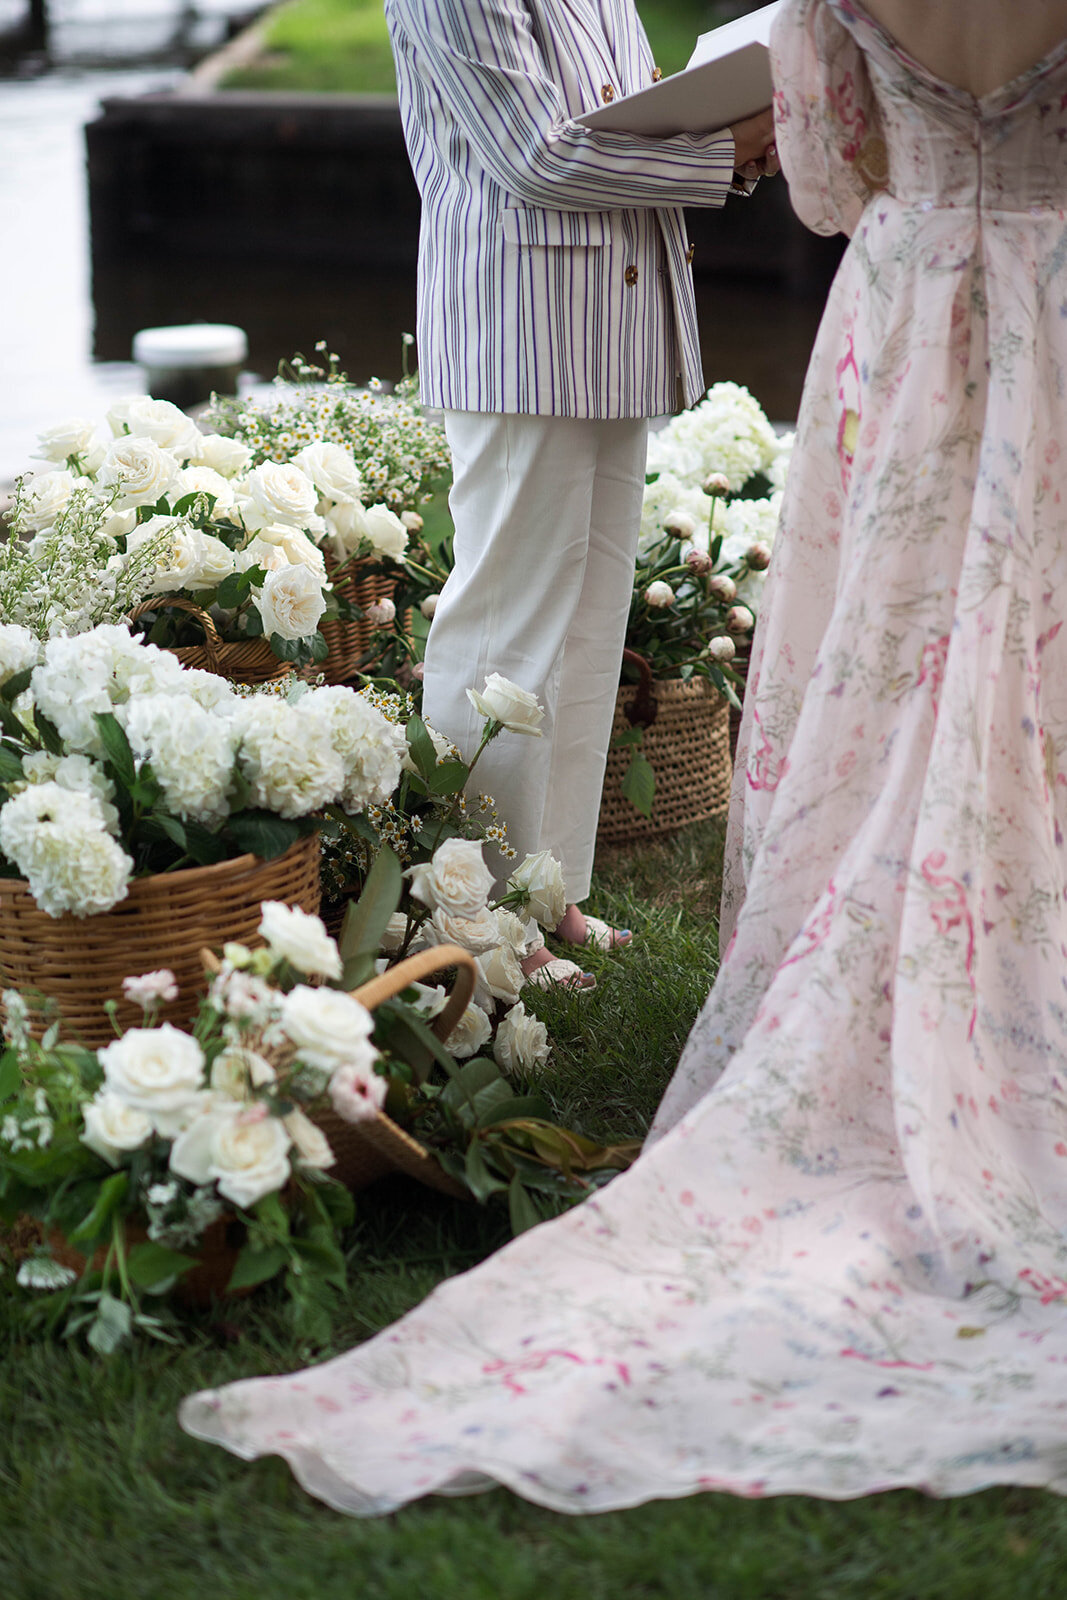 Wicker baskets filled with white garden roses, white hydrangea, blush peonies, and blush butterfly ranunculus. Close-up of the bride’s floral gown and an officiant wearing a pinstripe jacket.